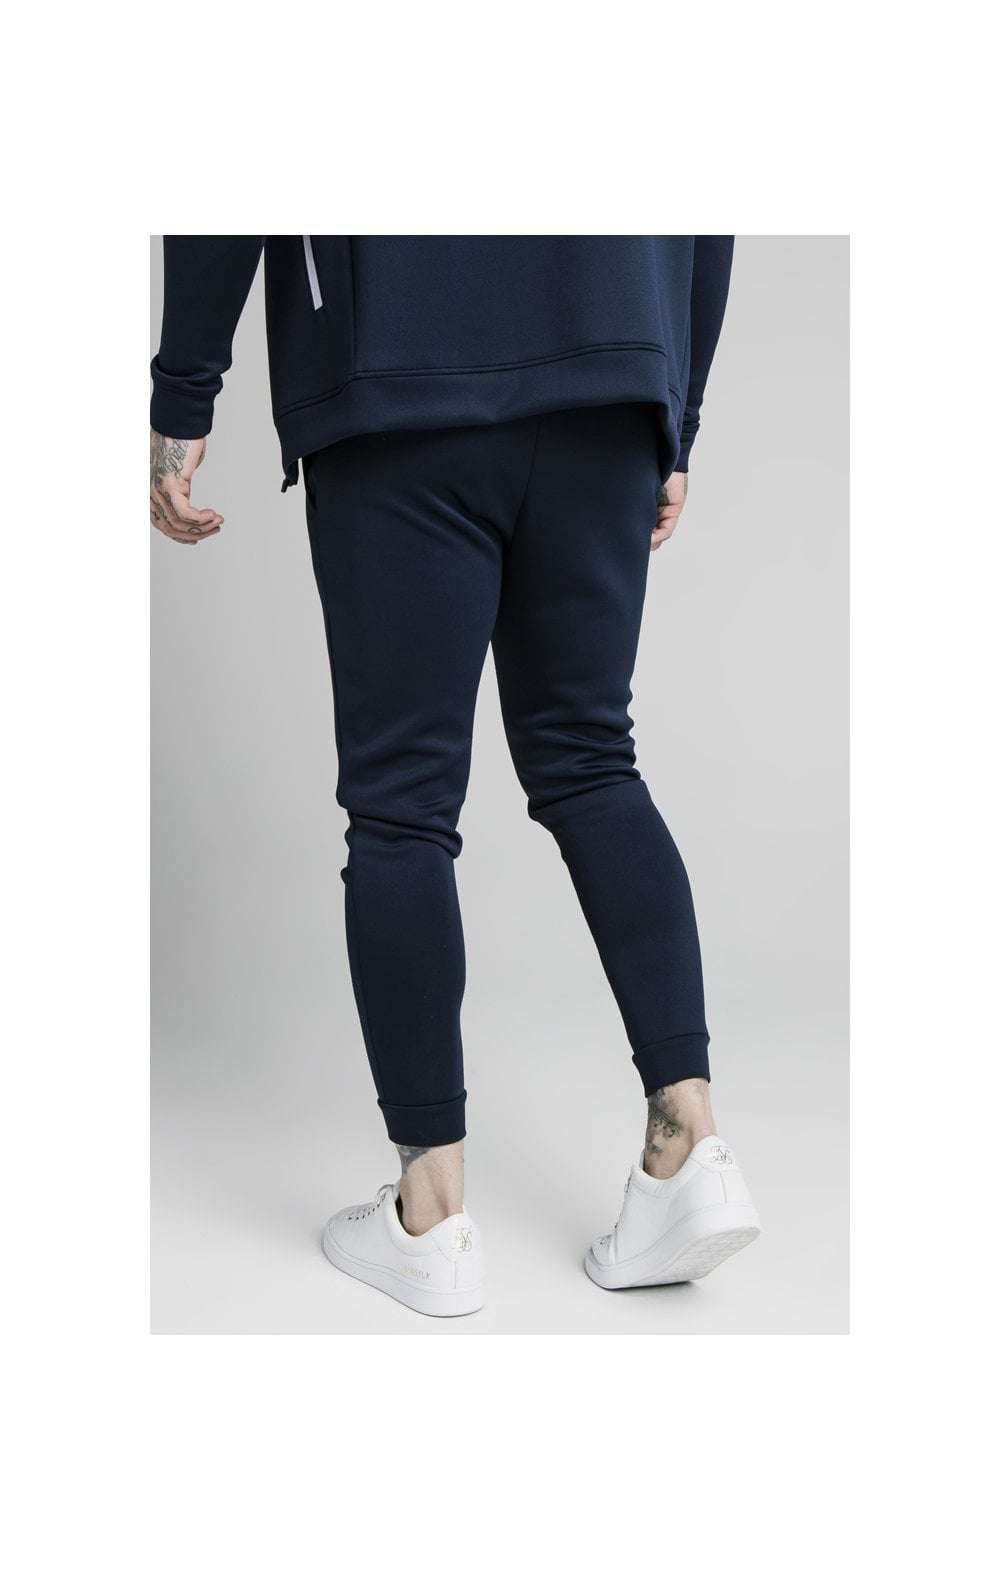 SikSilk Element Muscle Fit Cuff Joggers - Navy & White (1)